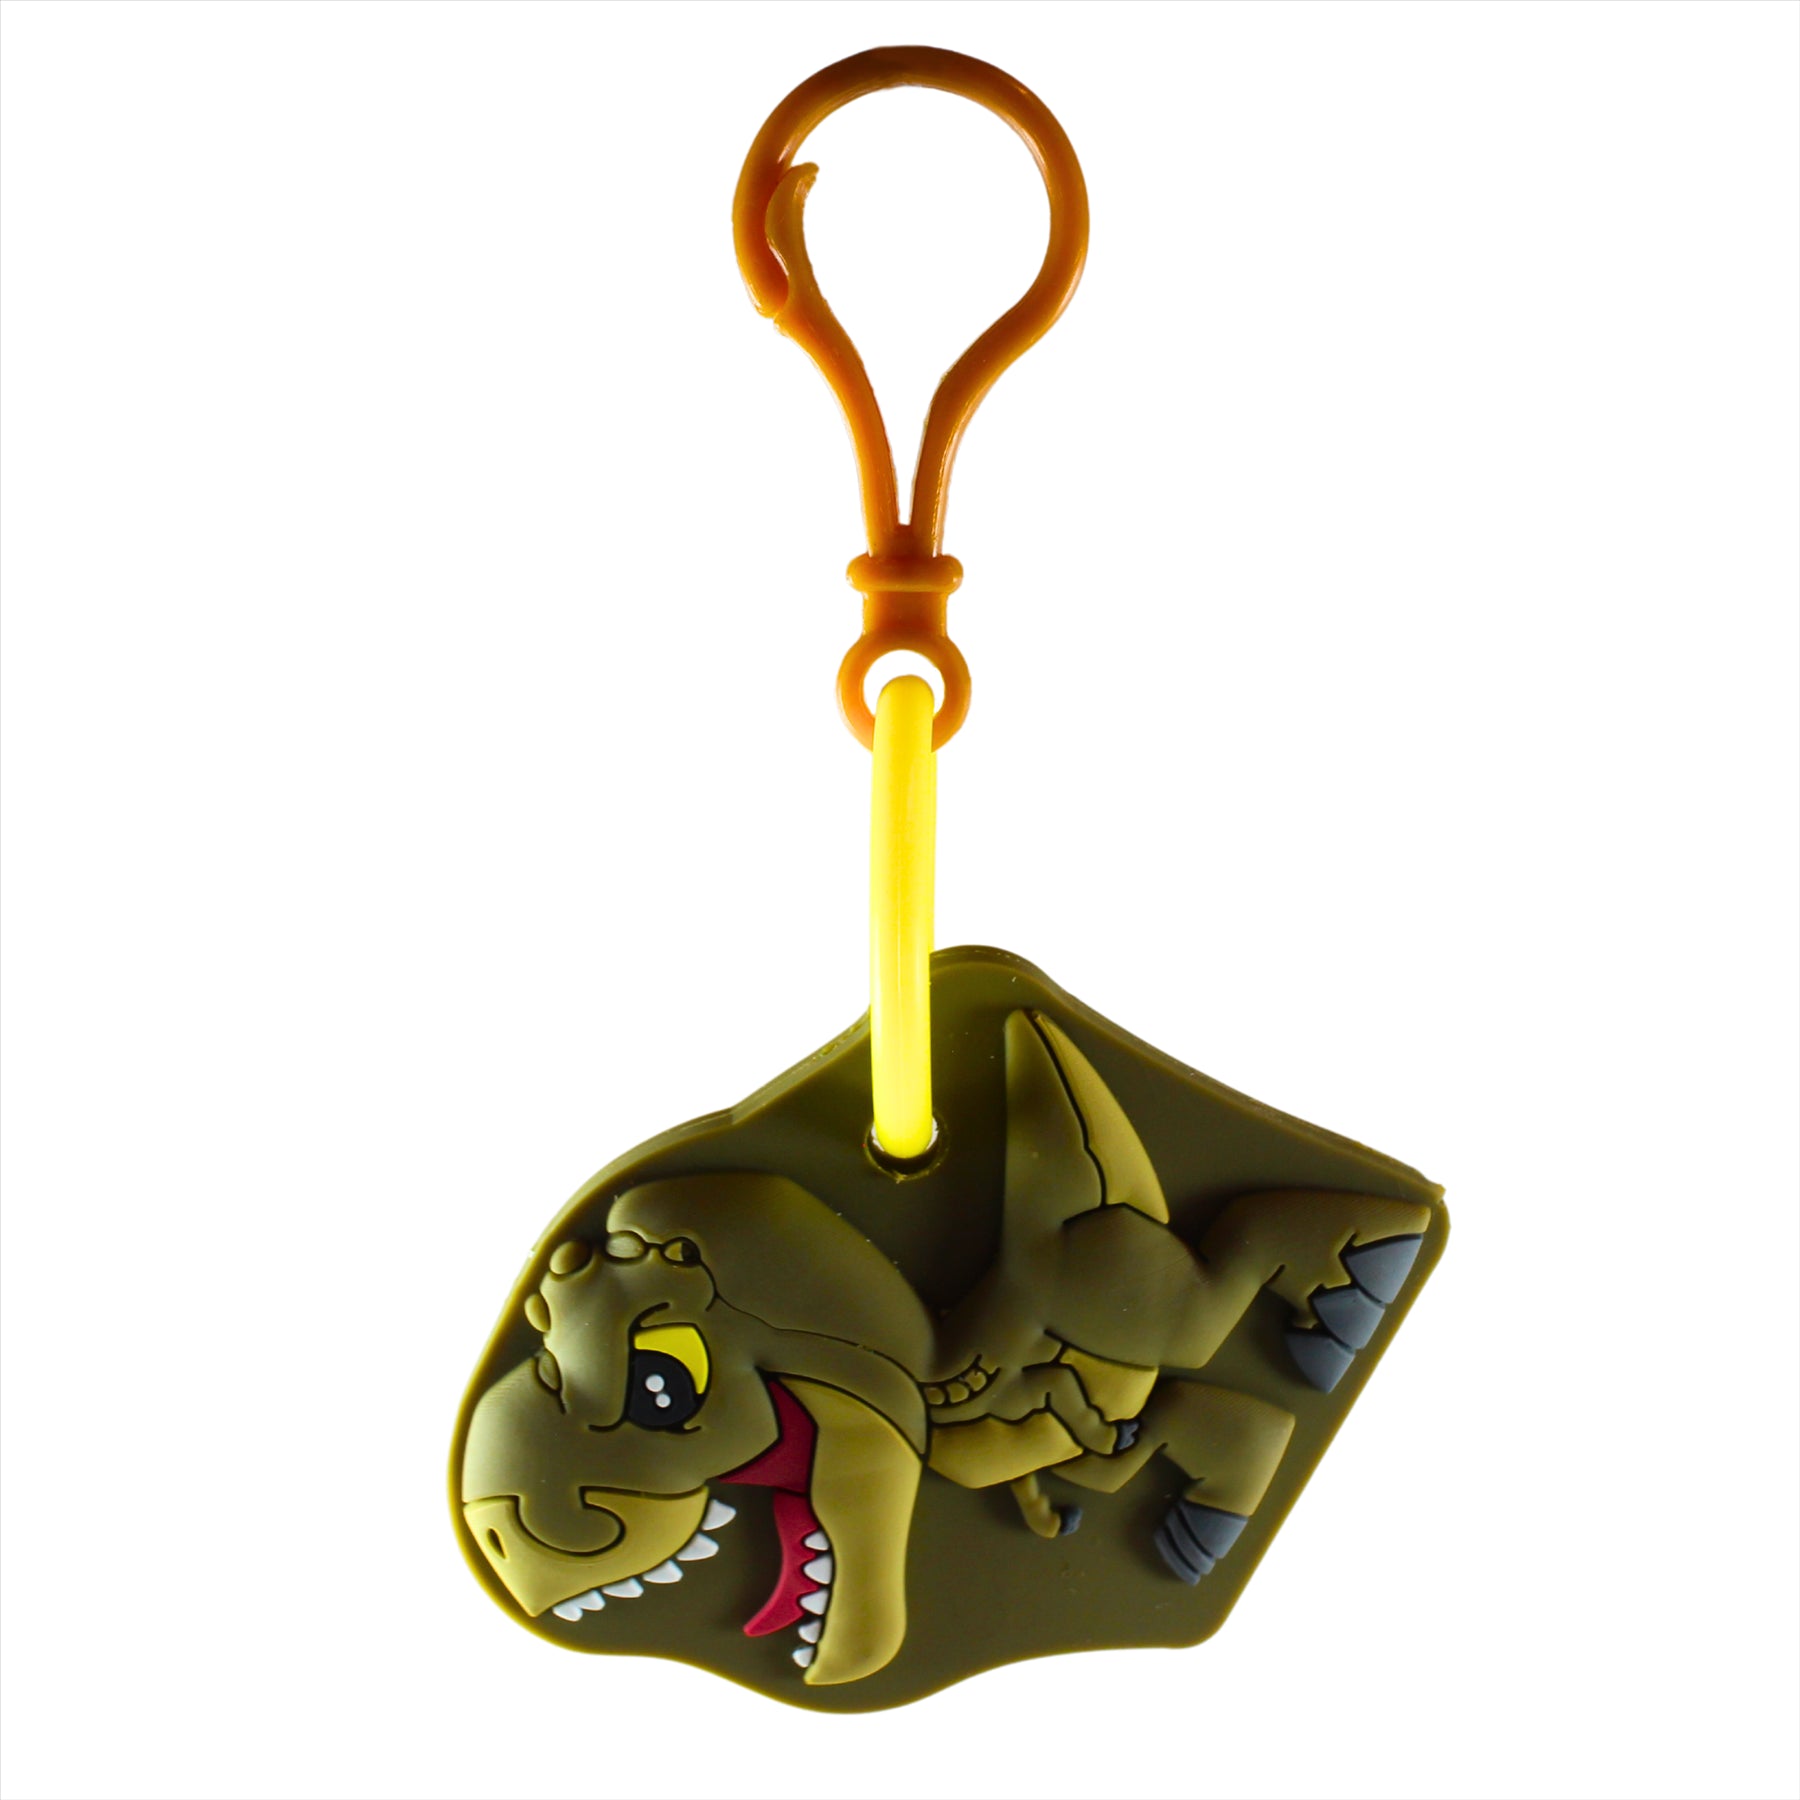 Jurassic World Collectable 3D Soft PVC Toy Dinosaur Keyclips - Pack of 6 - Toptoys2u